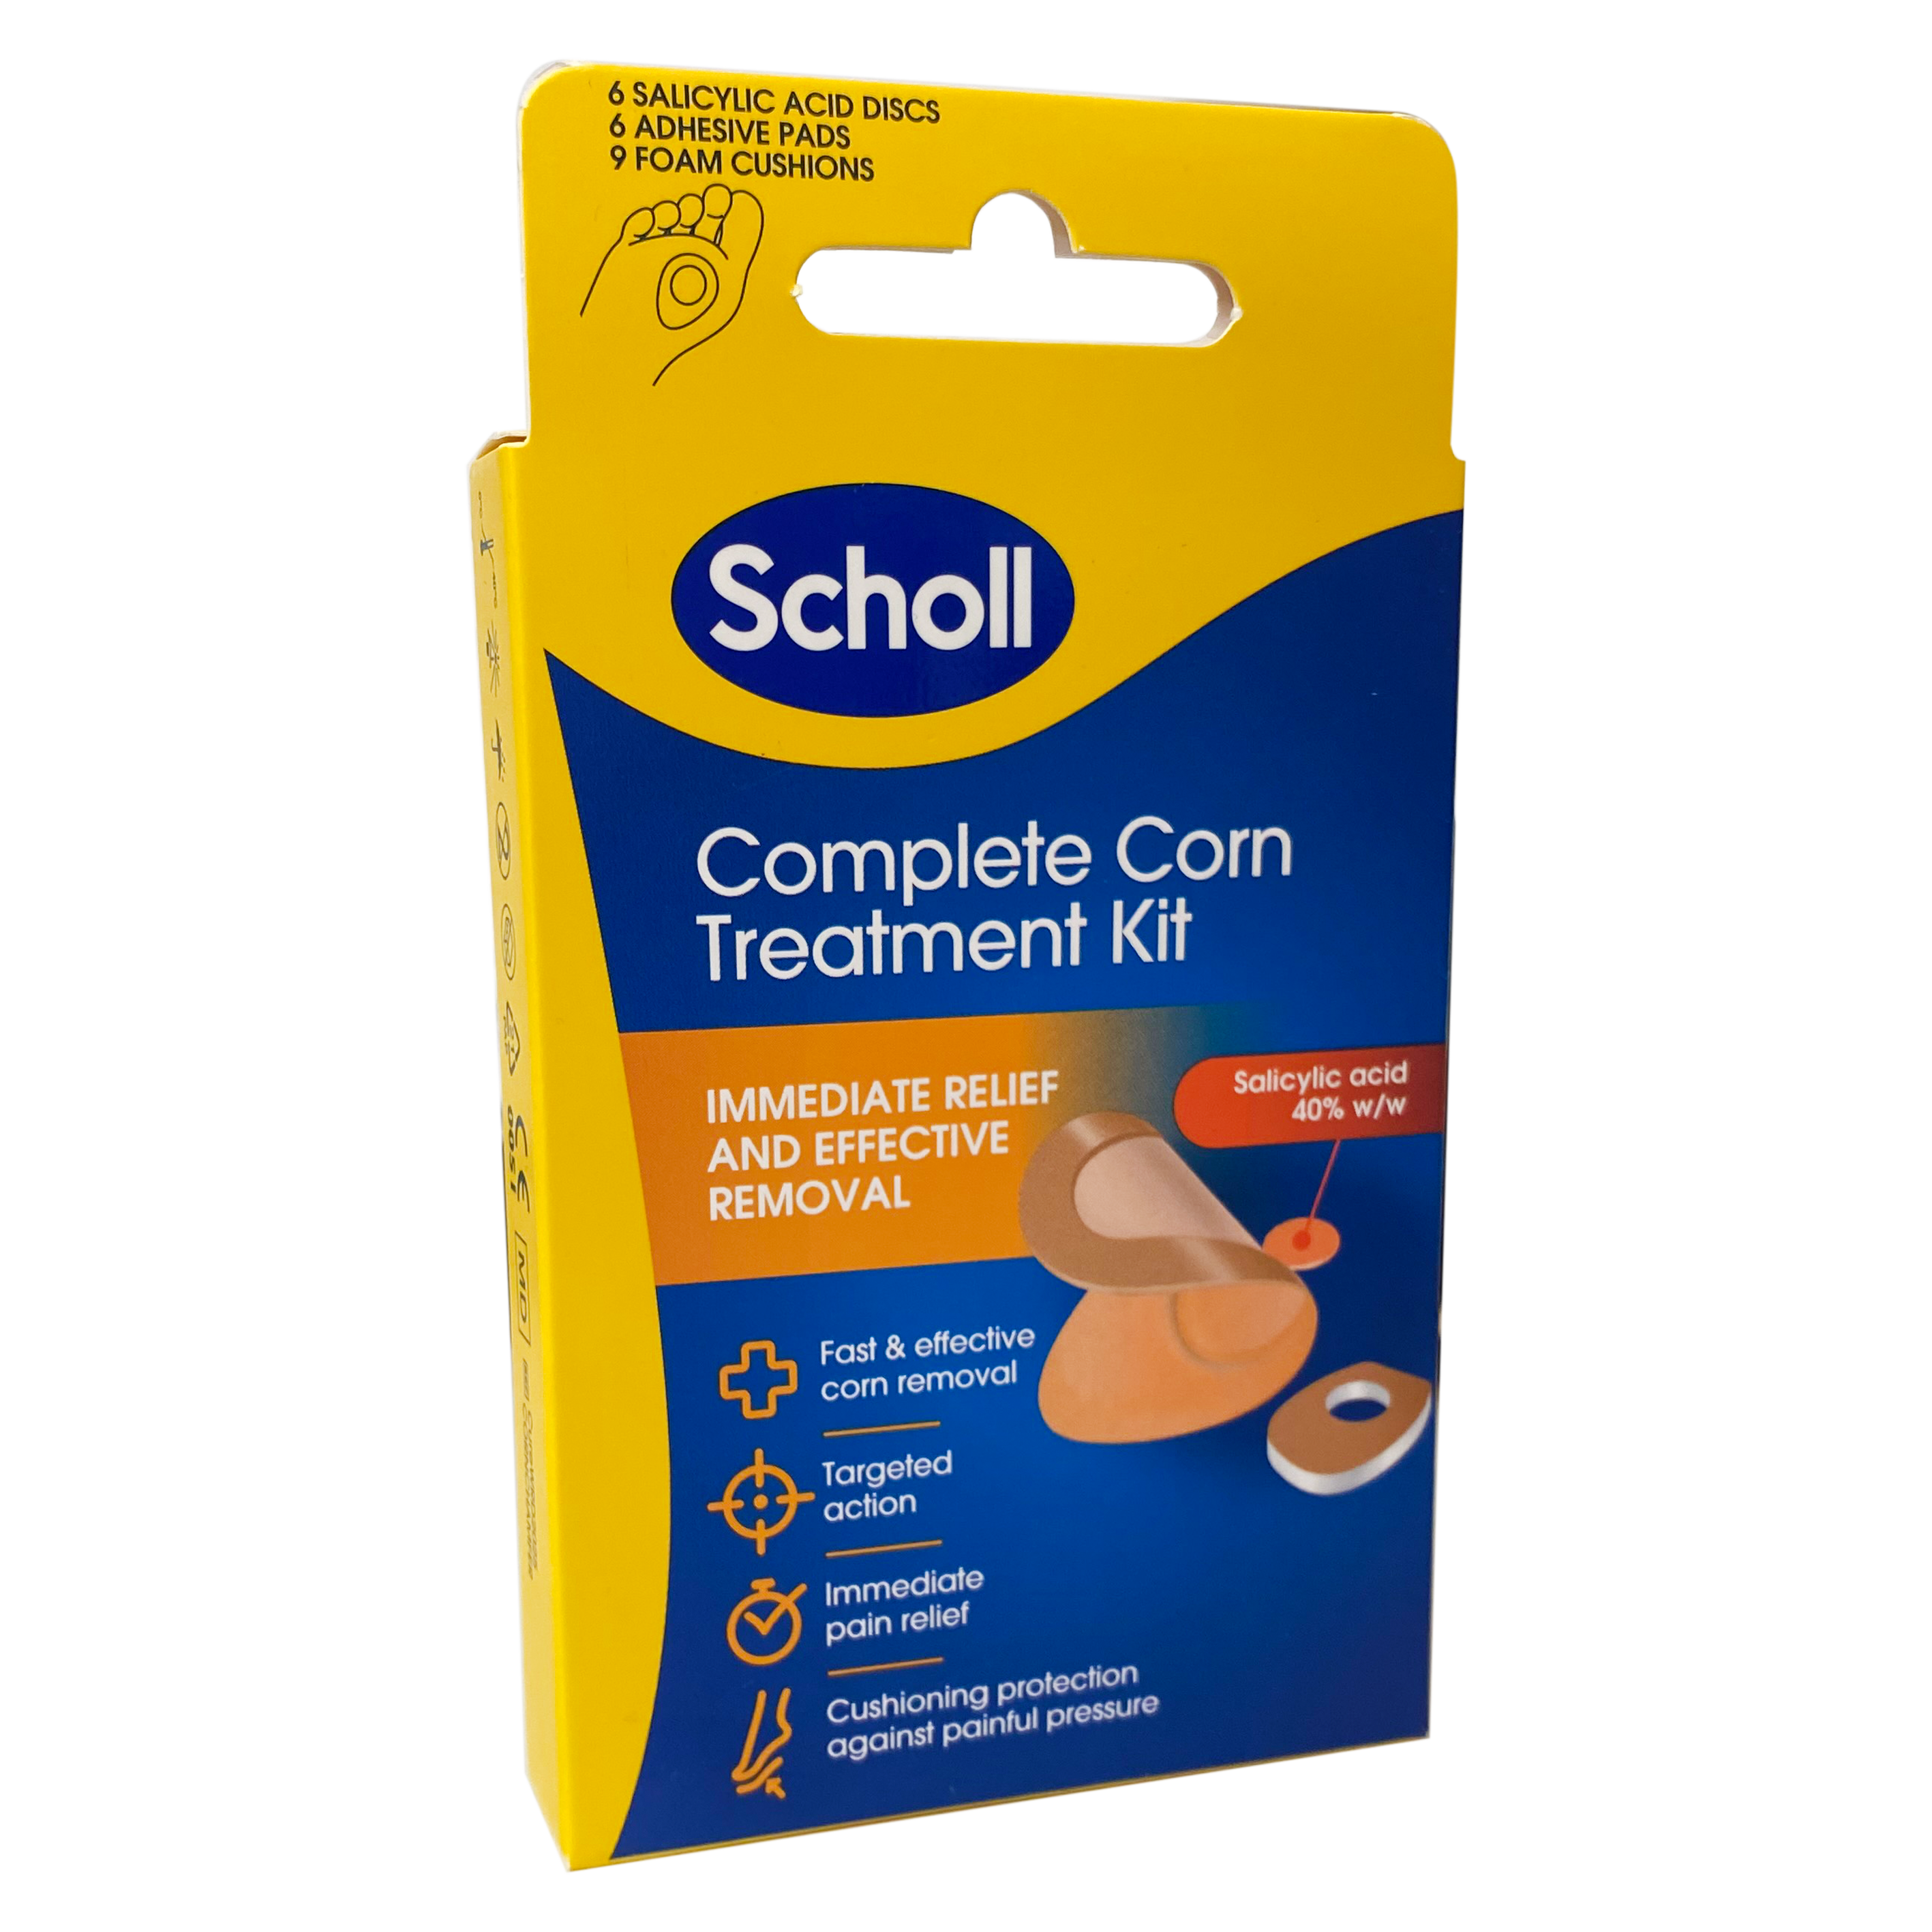 Scholl Complete Corn Treatment Kit - Athlete's Foot and Fungal Infections